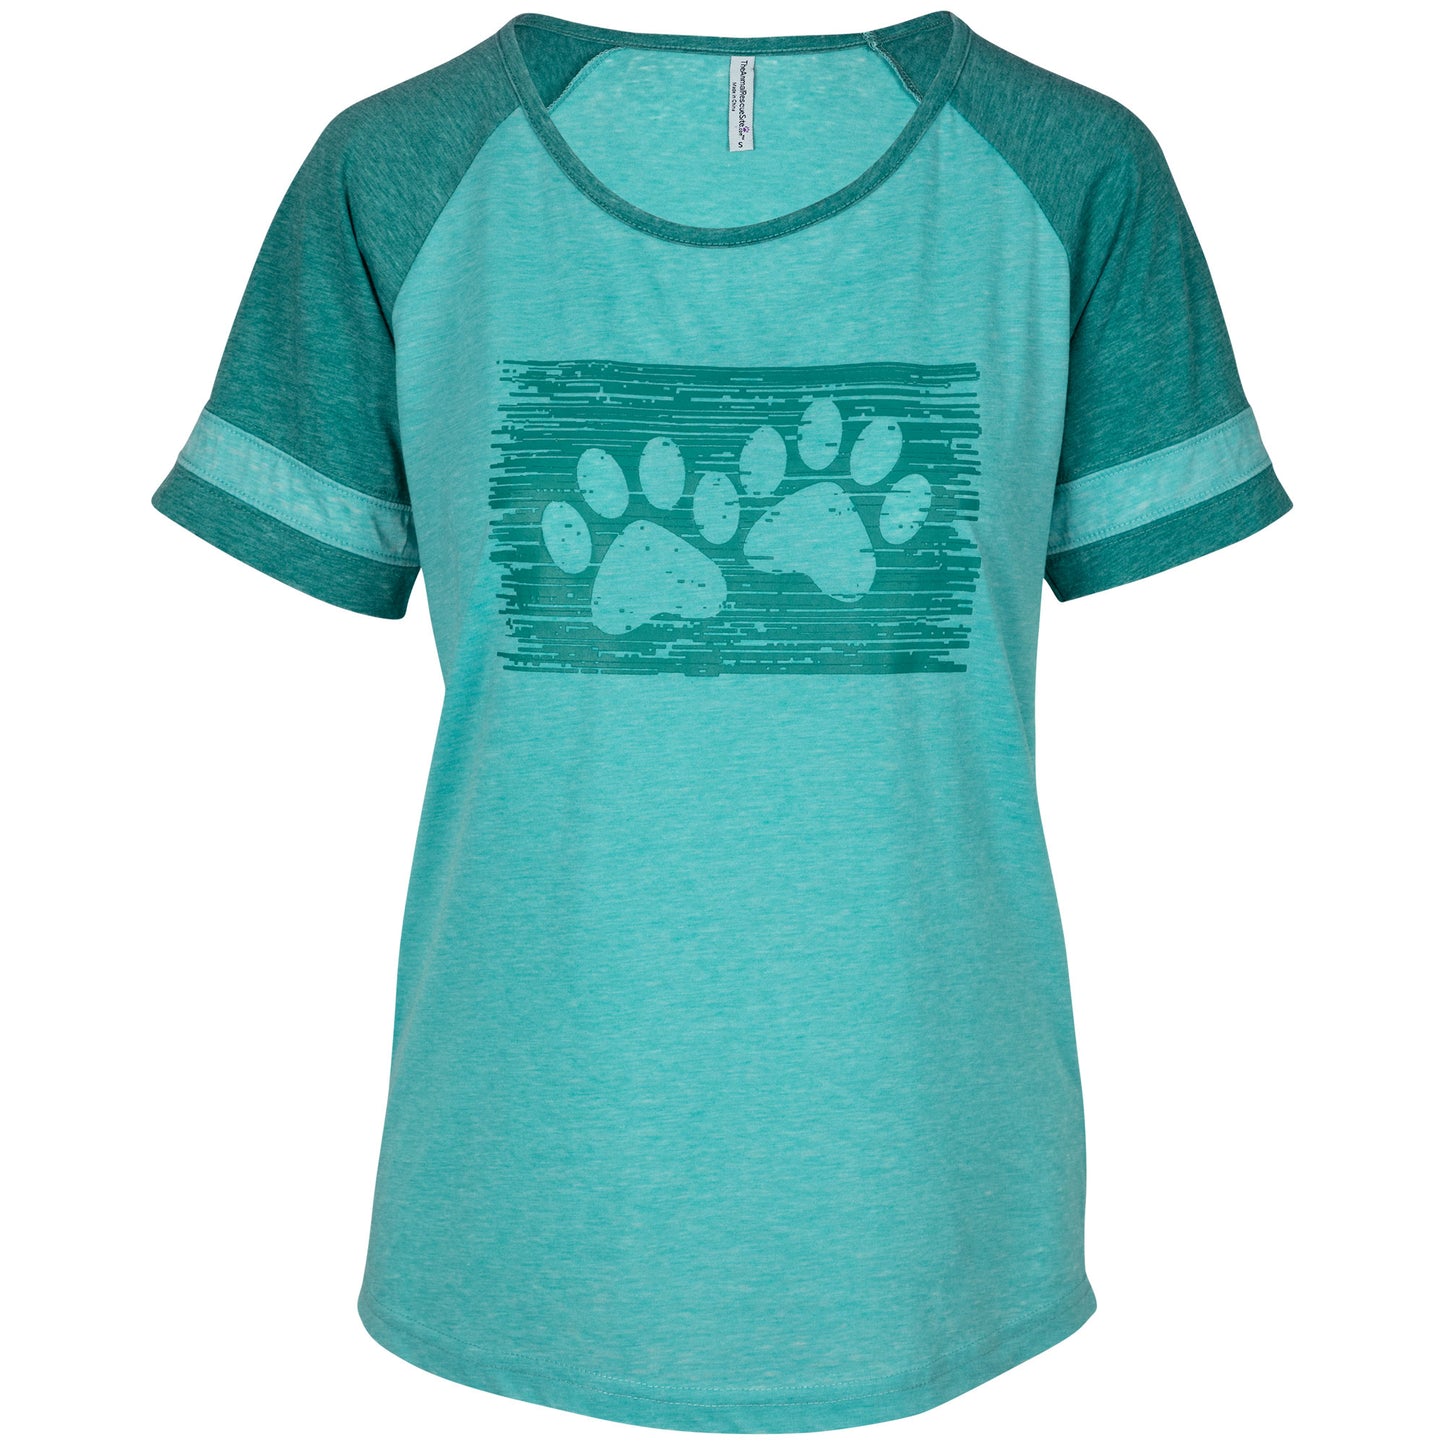 Pets & Paws Love Burnout Football Tee